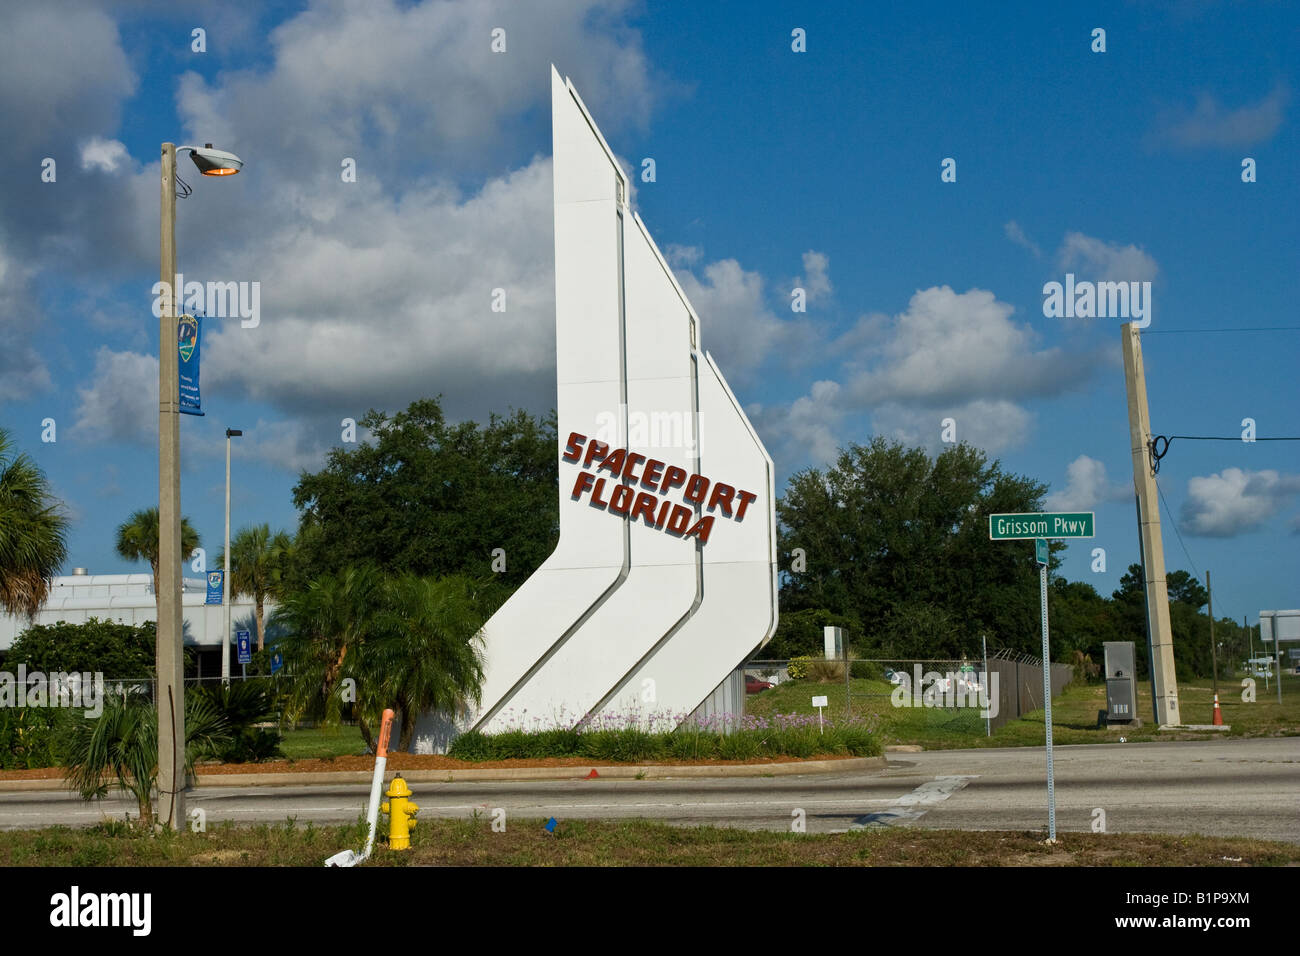 Entrance Sign to Spaceport Florida in Titusville Florida USA Stock Photo